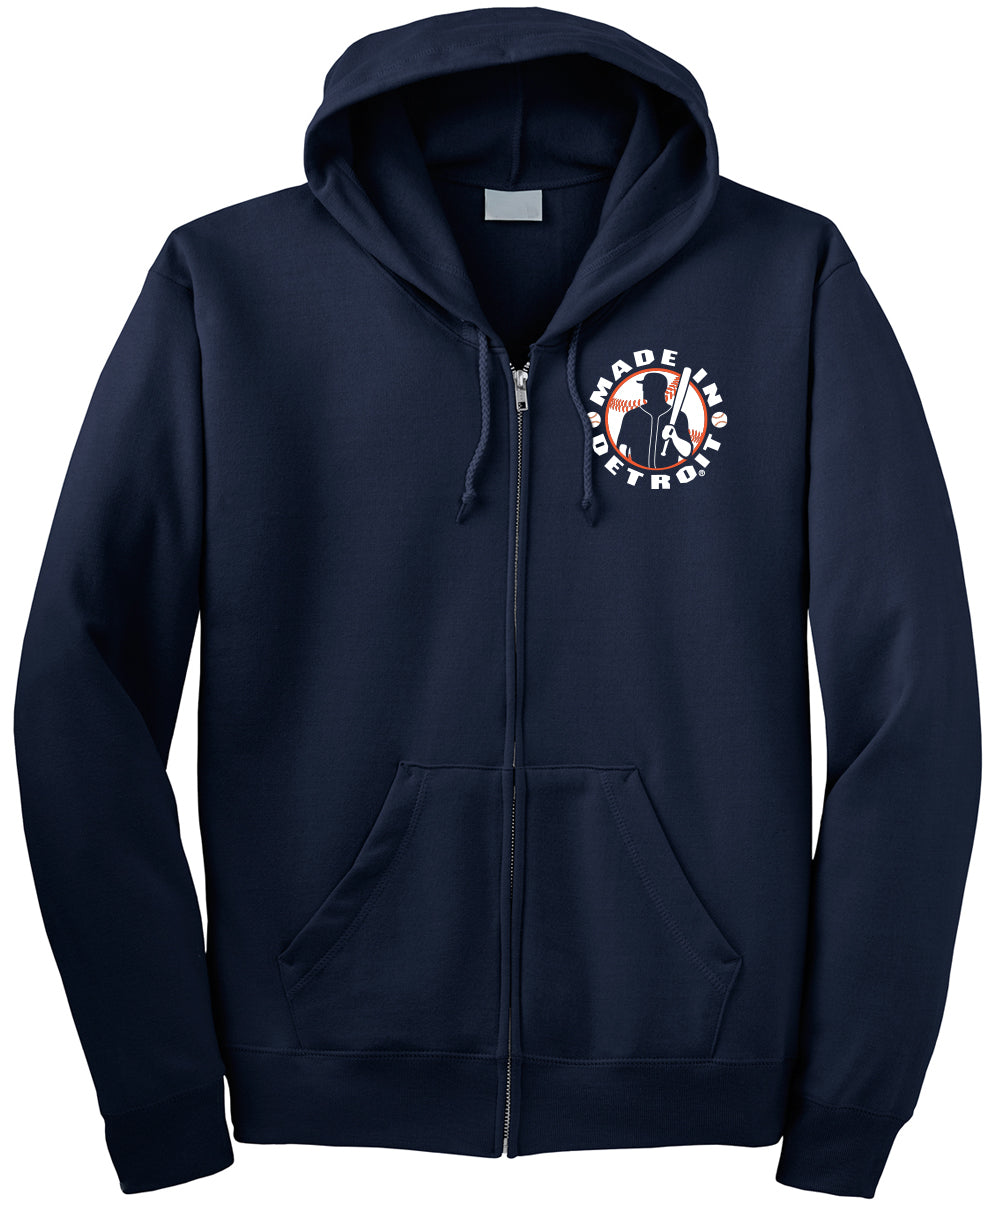 Opening Day 2023 Zip-Up